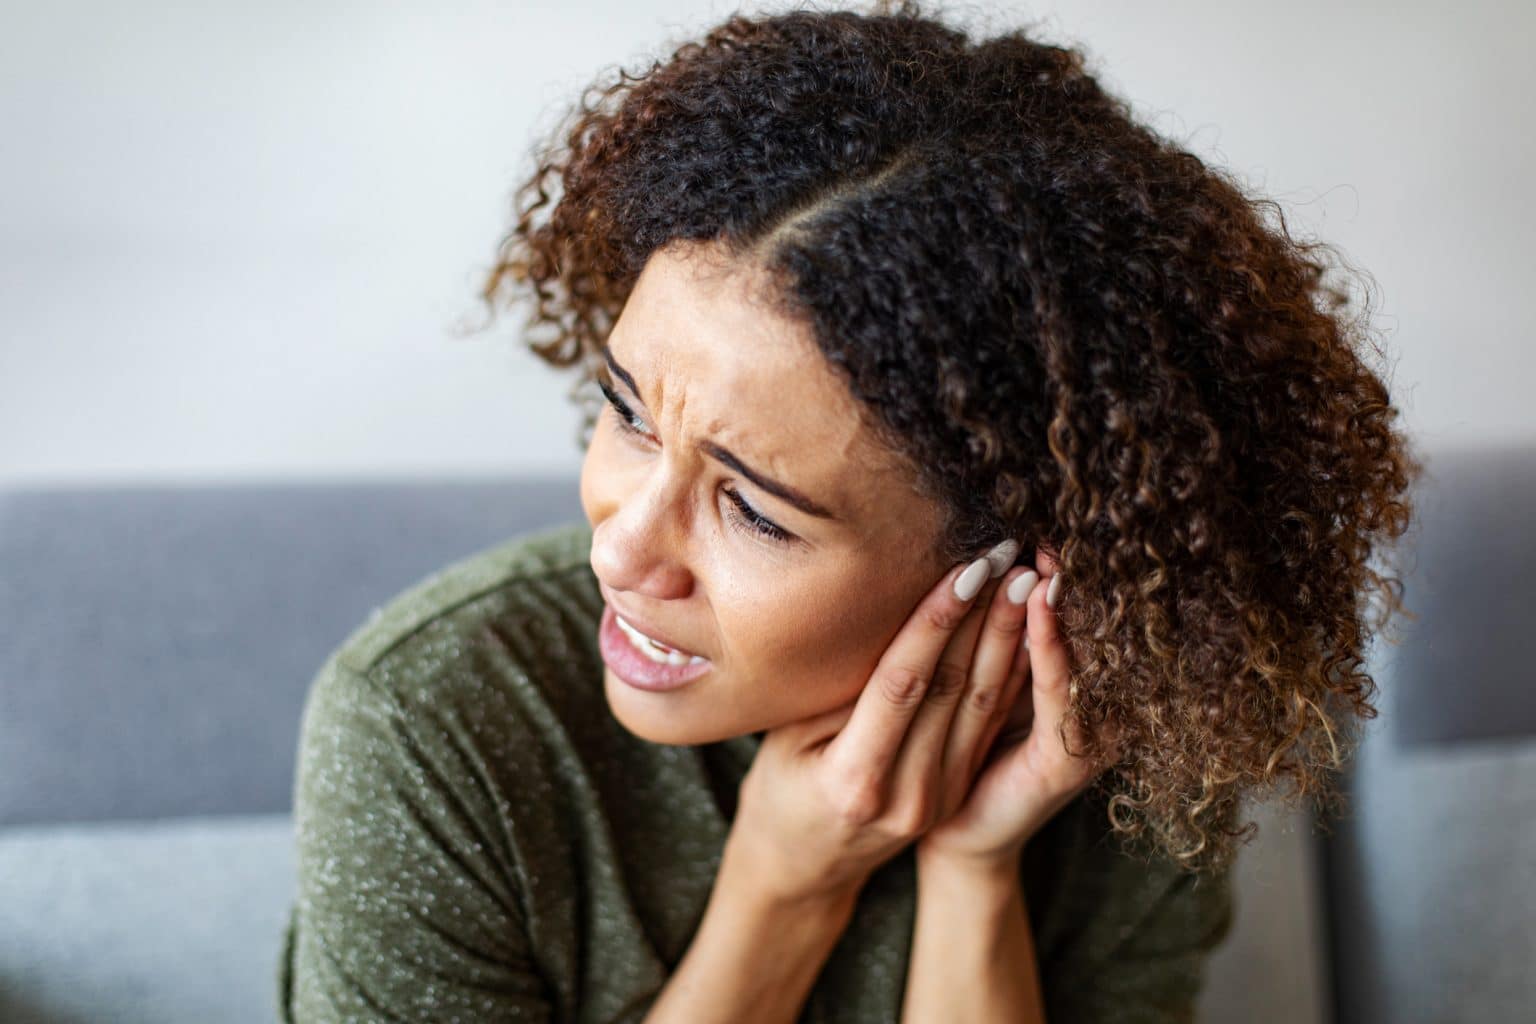 A woman experiencing ear and hearing discomfort.